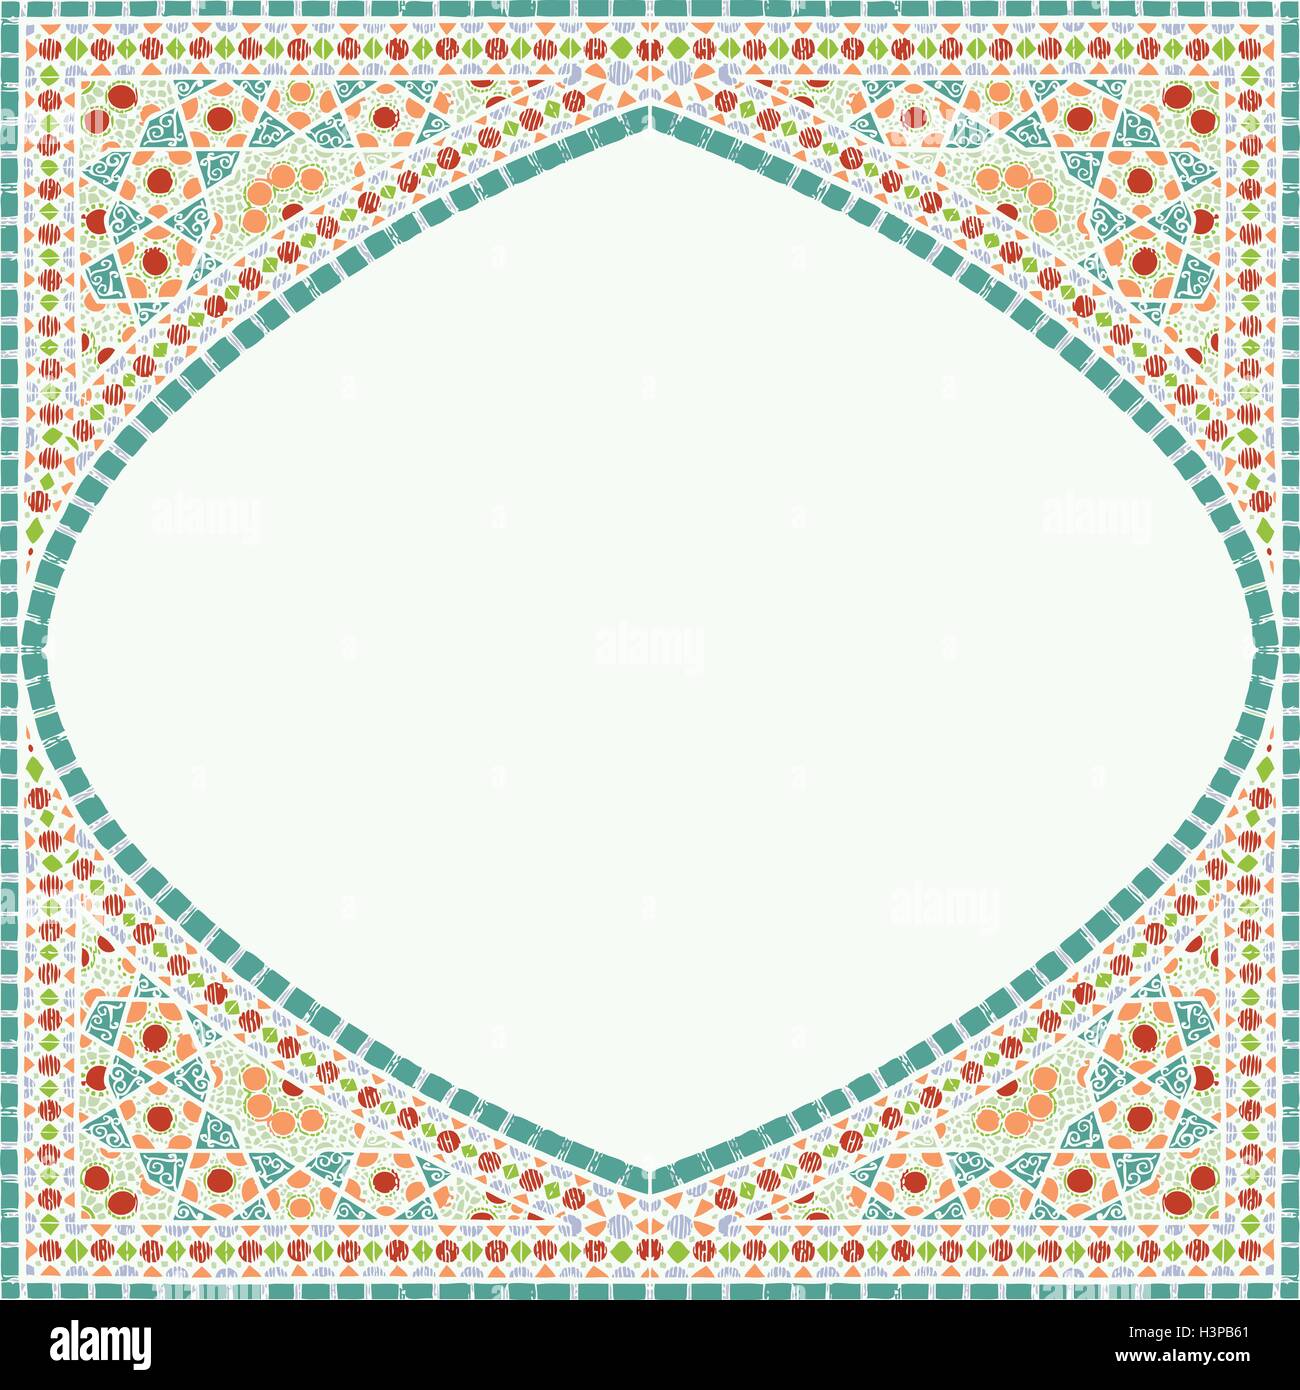 Geometric corner frame pattern ethnic tile colorful abstract background vector Stock Vector